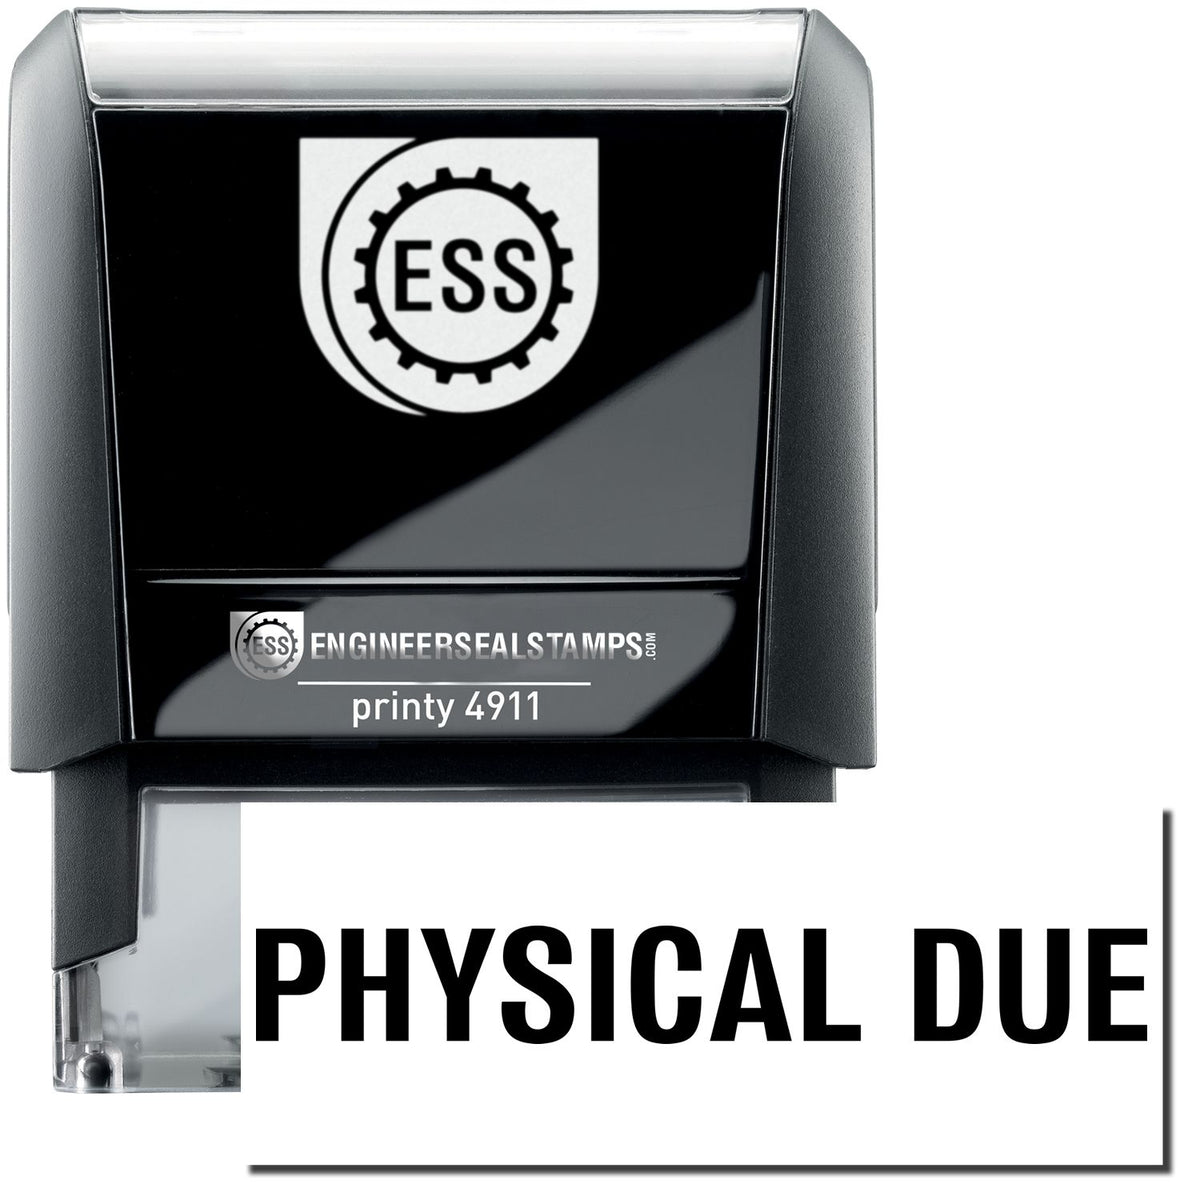 A self-inking stamp with a stamped image showing how the text &quot;PHYSICAL DUE&quot; in bold font is displayed after stamping.